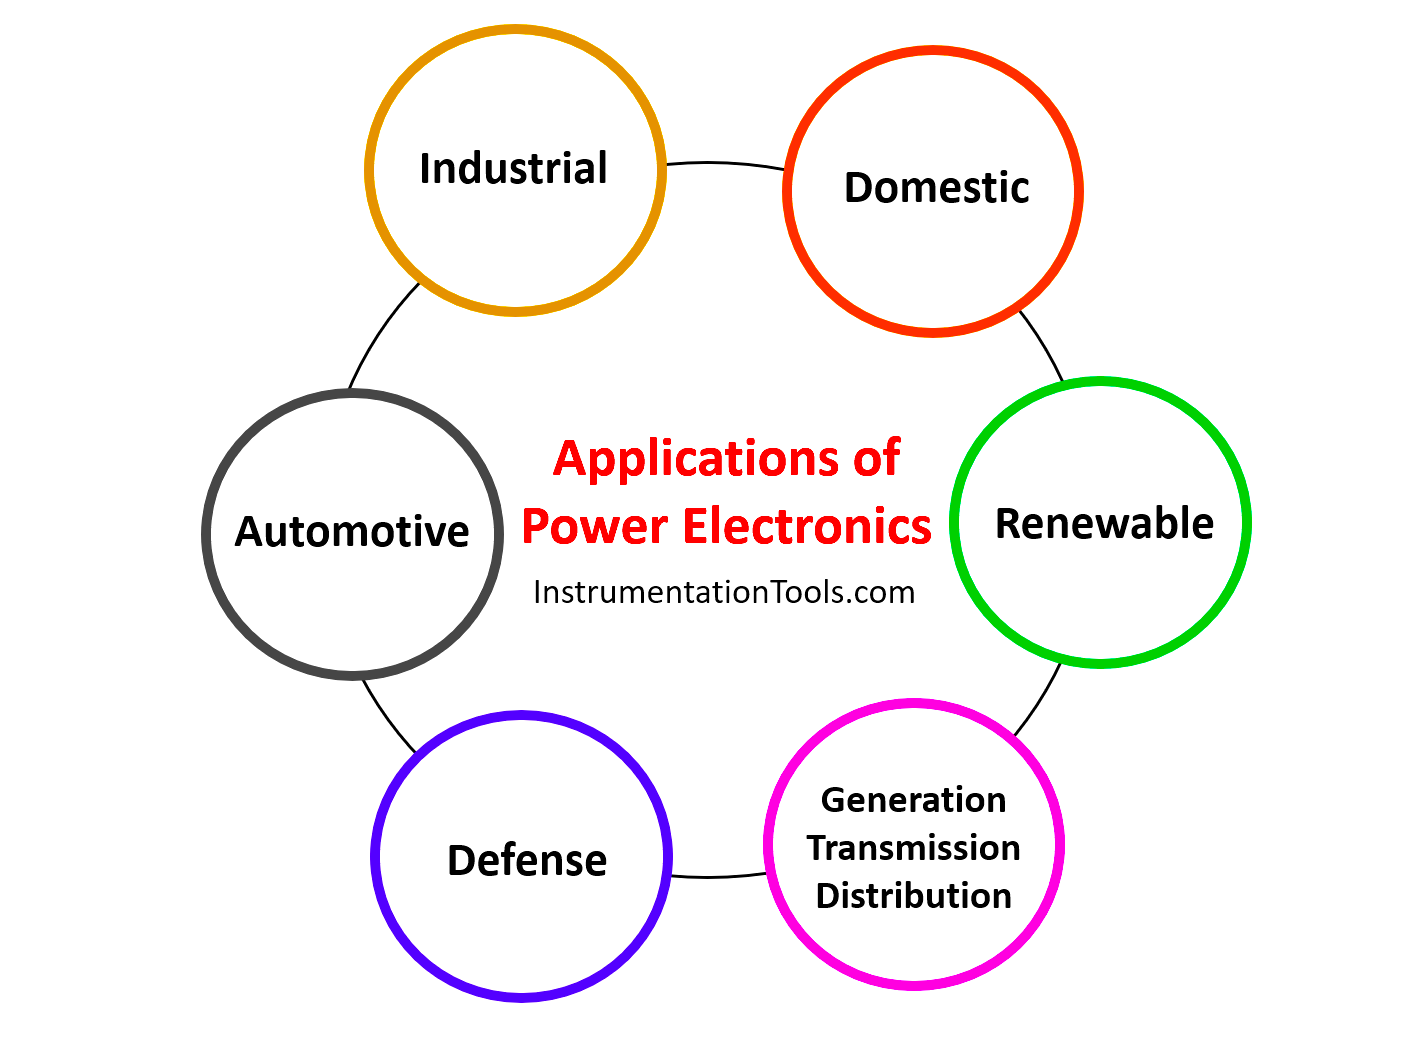 Applications of Power Electronics